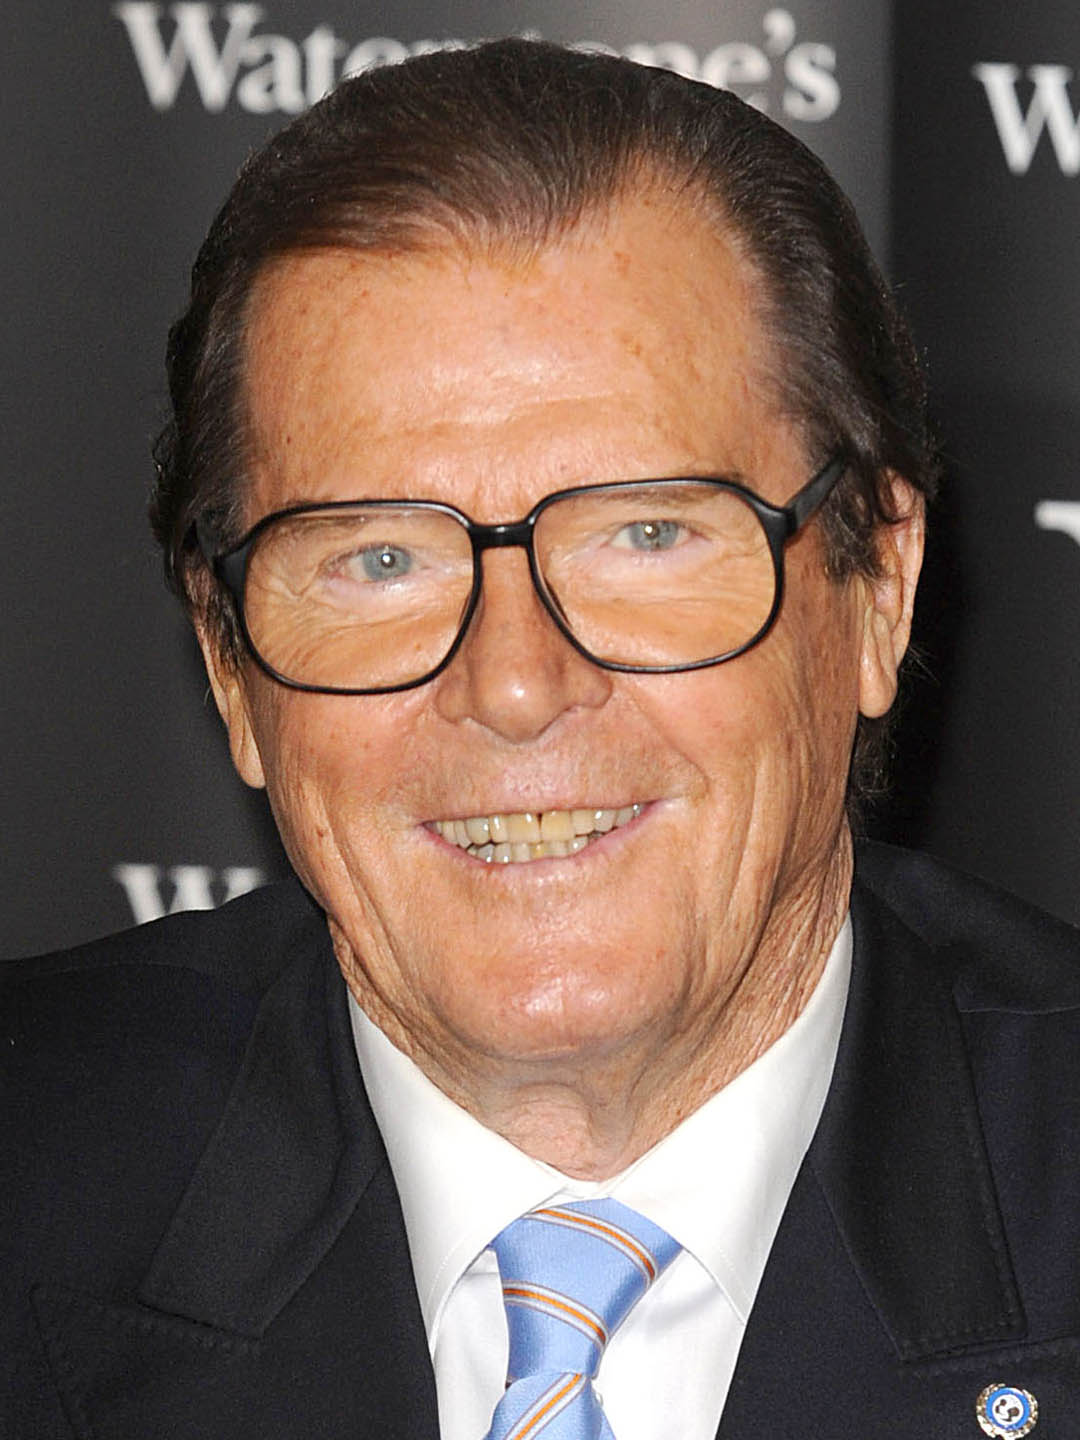 How tall is Roger Moore?